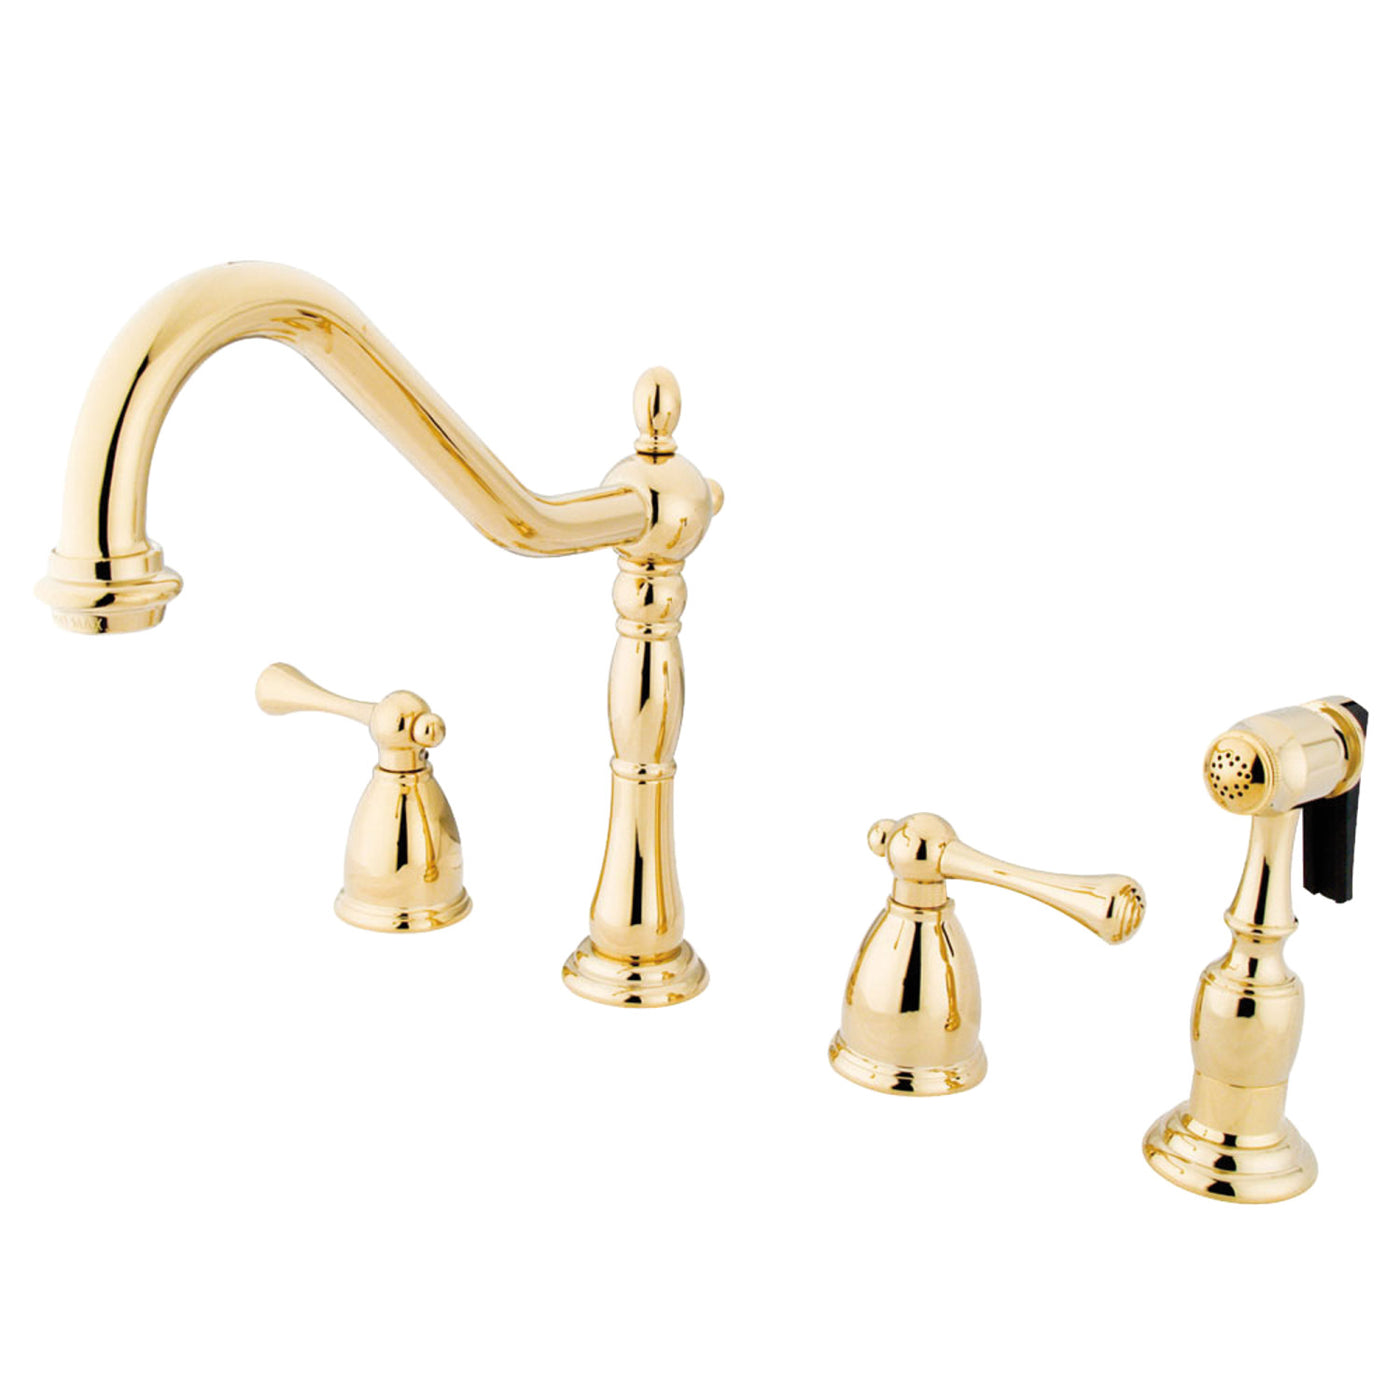 Elements of Design EB1792BLBS Widespread Kitchen Faucet with Brass Sprayer, Polished Brass